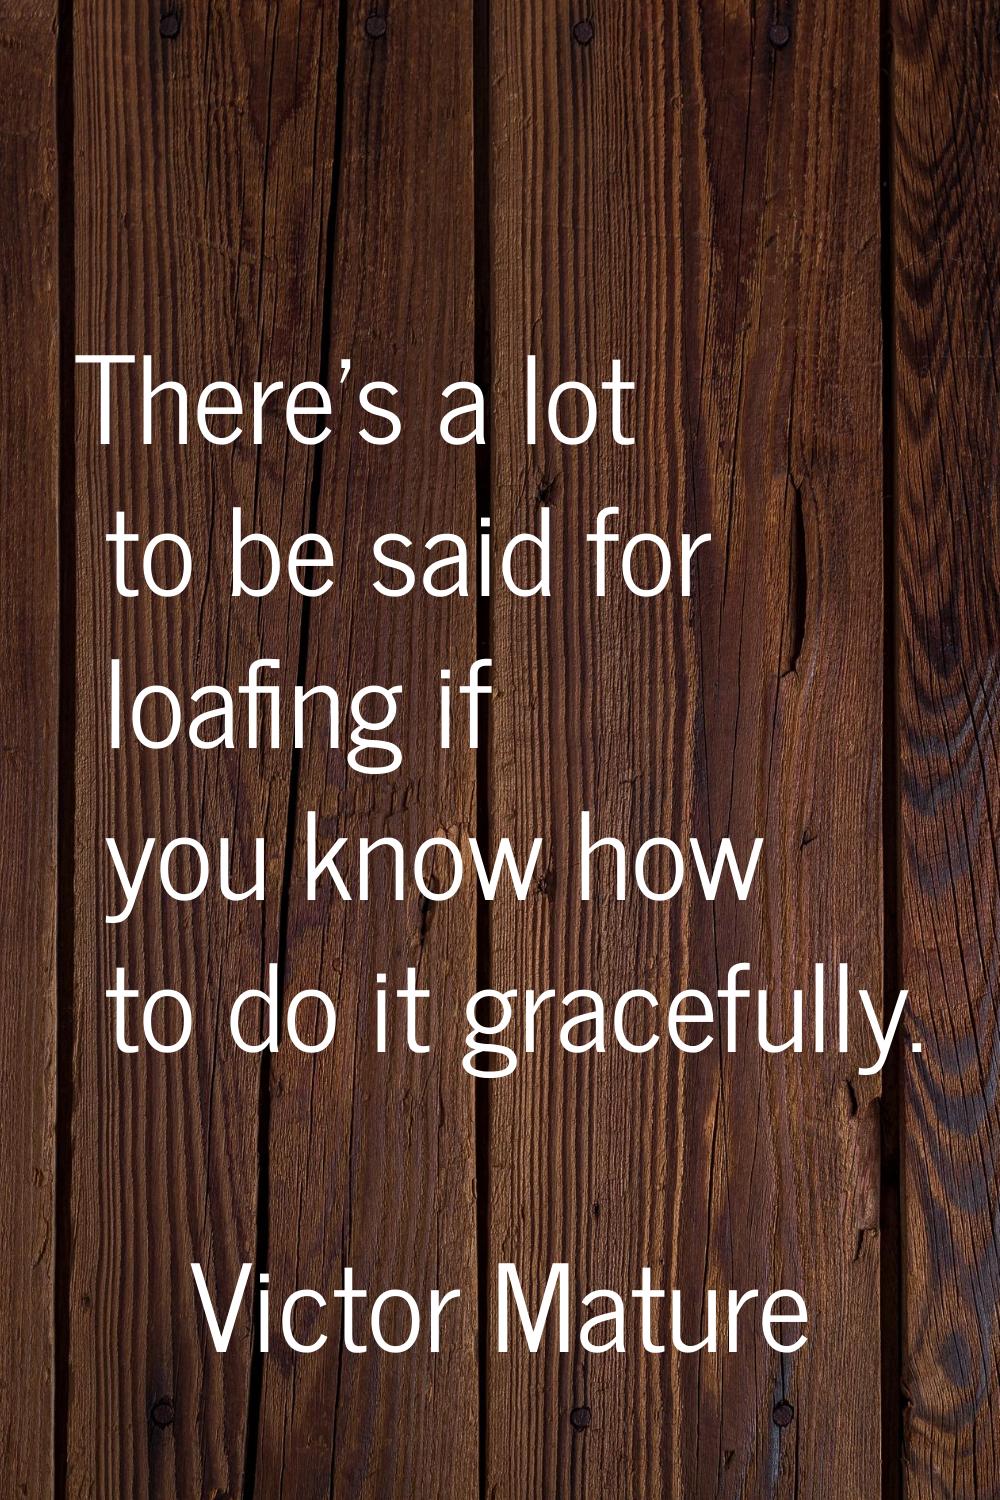 There's a lot to be said for loafing if you know how to do it gracefully.